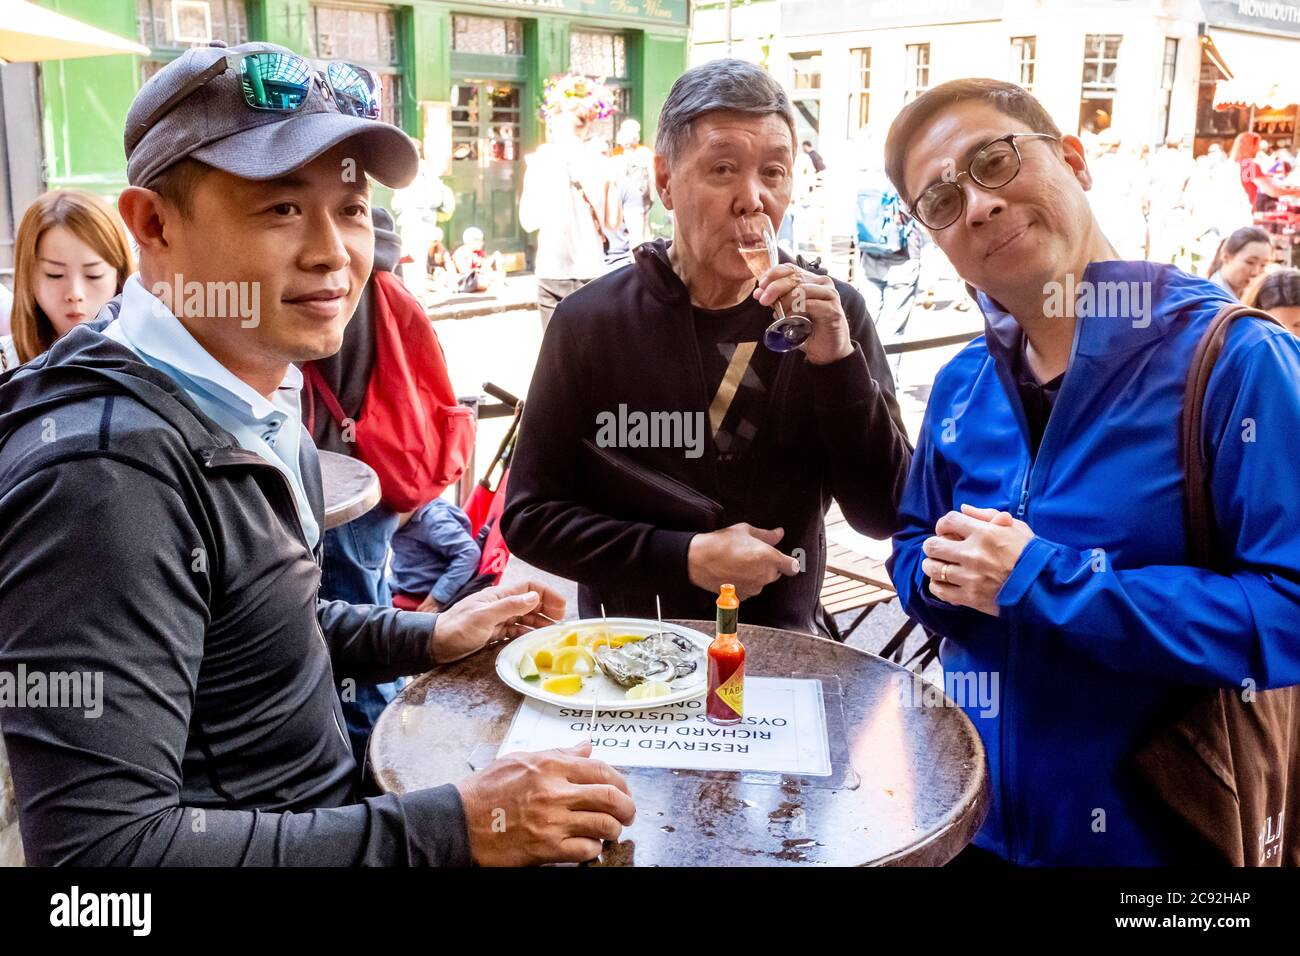 Asian People Eating Oysters At A Table In Borough Market, London, England. Stock Photo